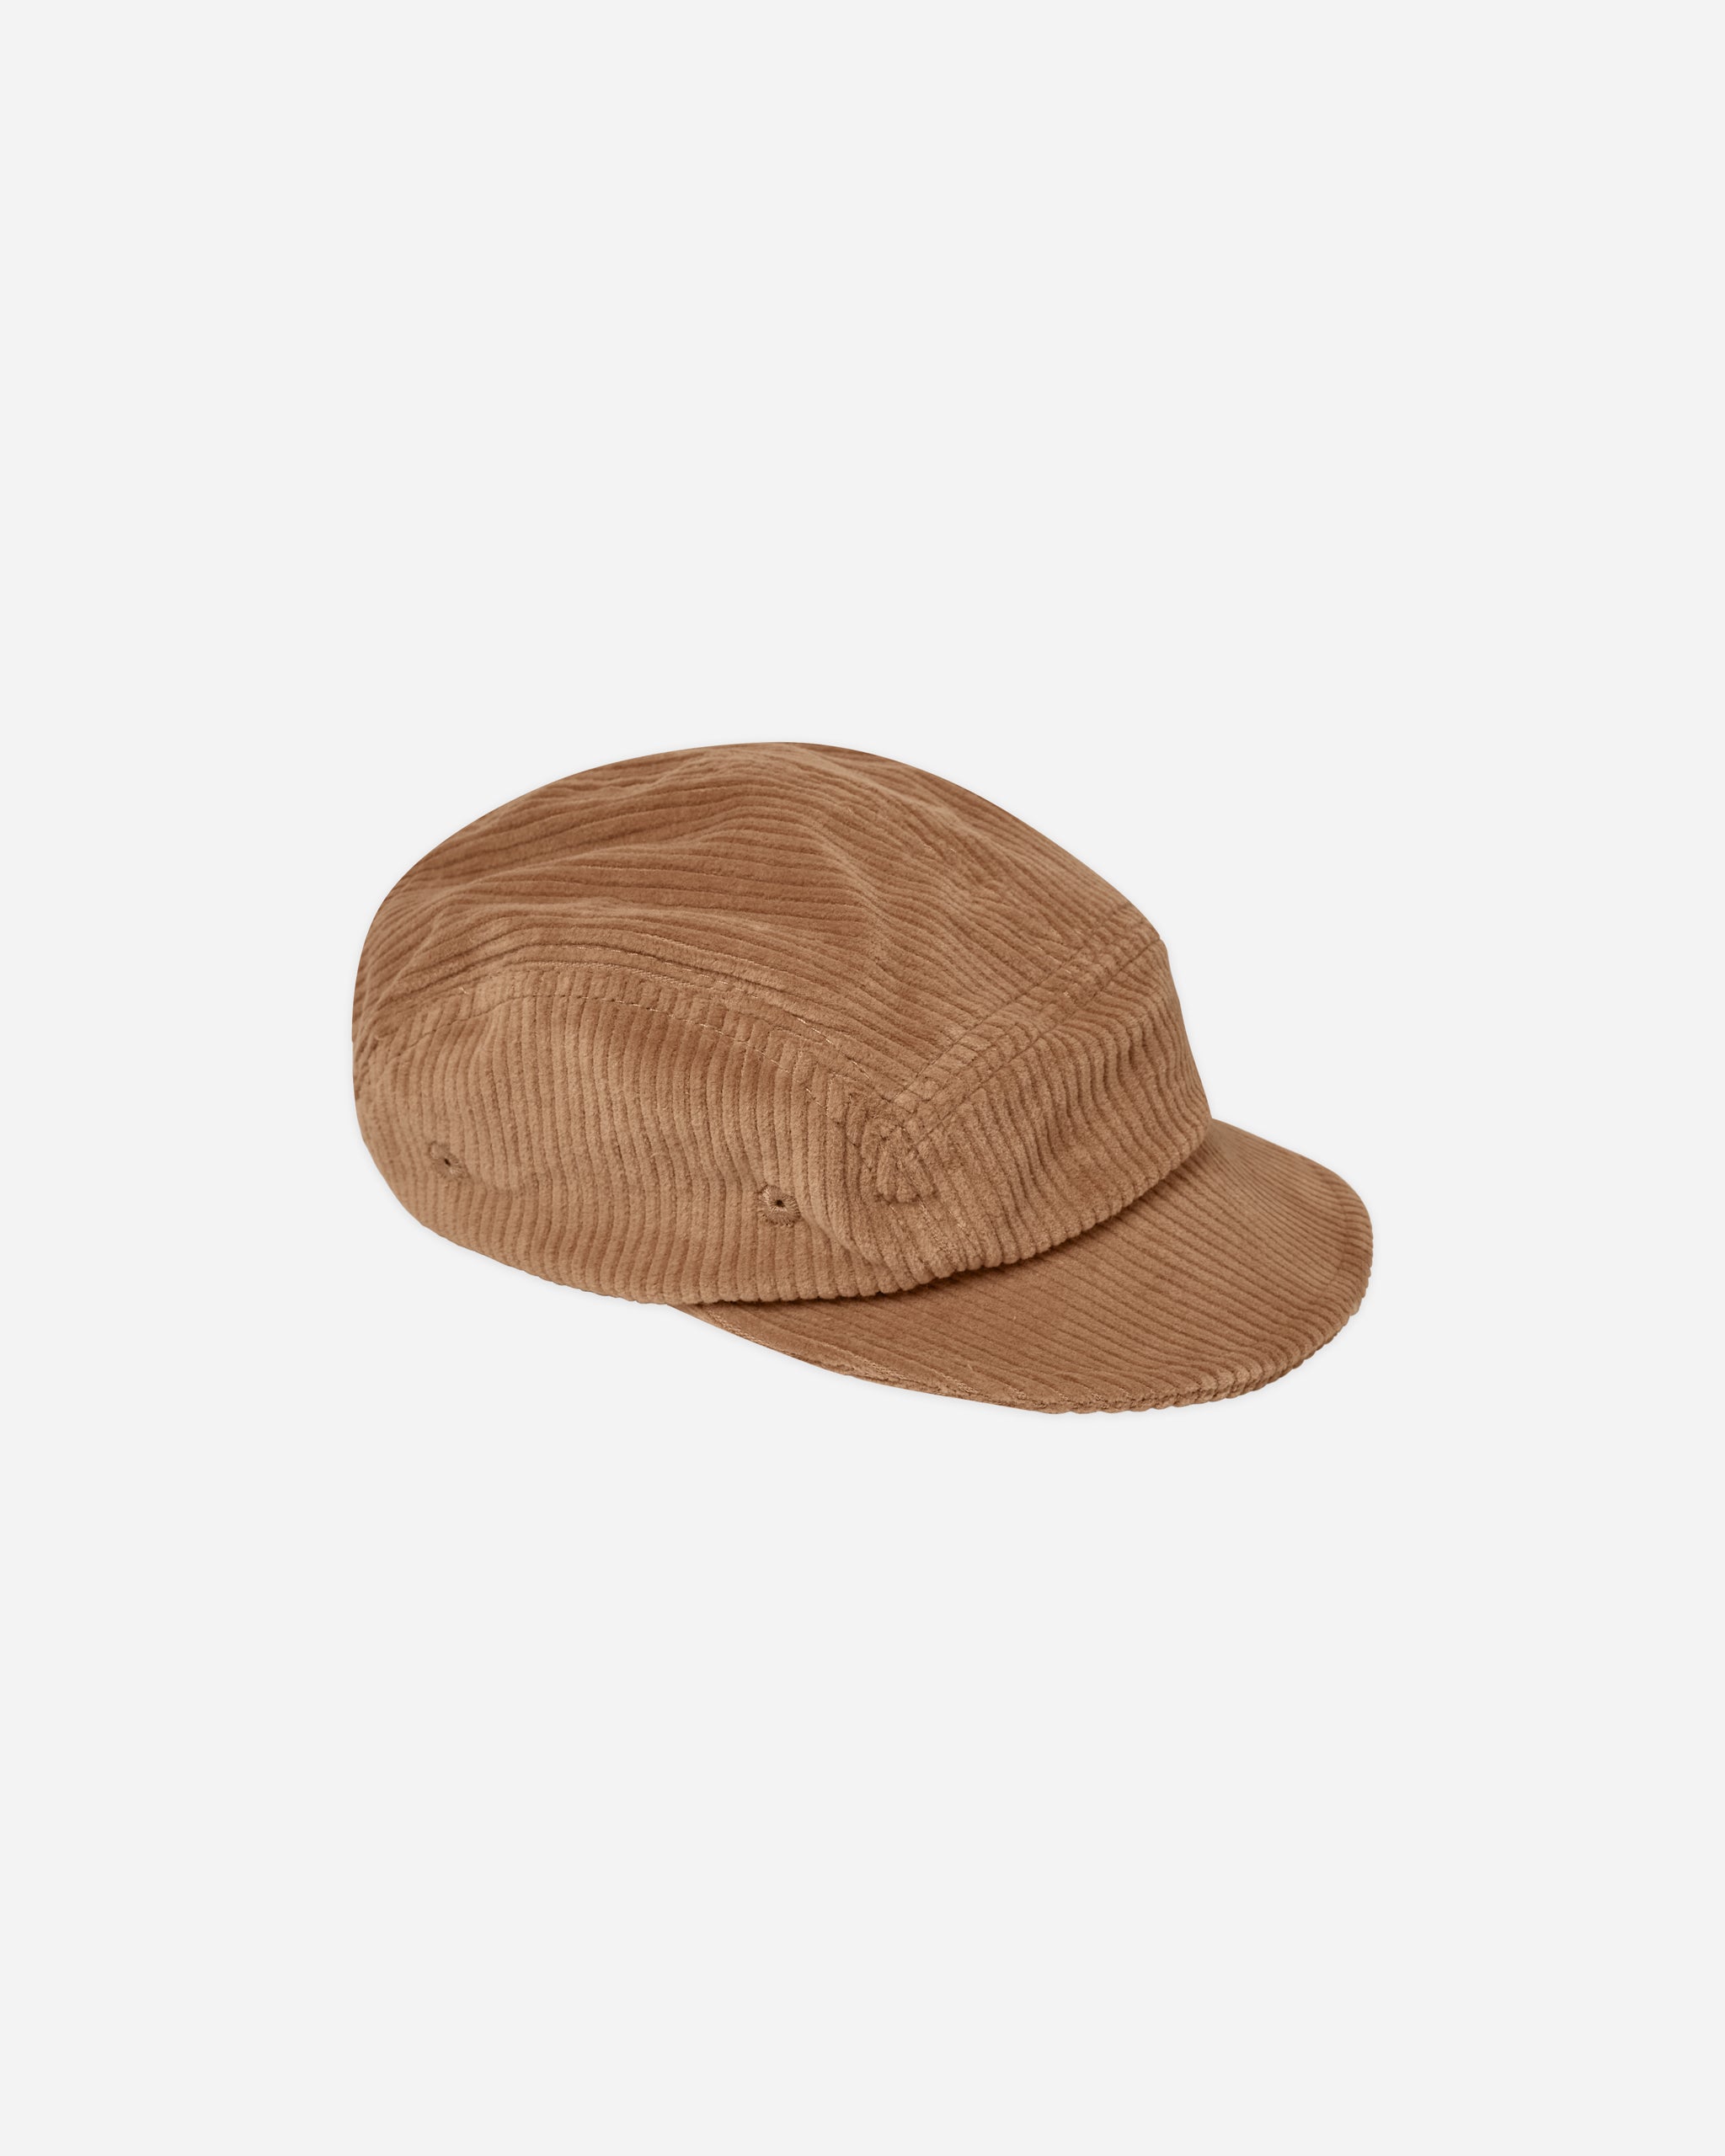 Corduroy Baby Cap || Cinnamon - Rylee + Cru | Kids Clothes | Trendy Baby Clothes | Modern Infant Outfits |